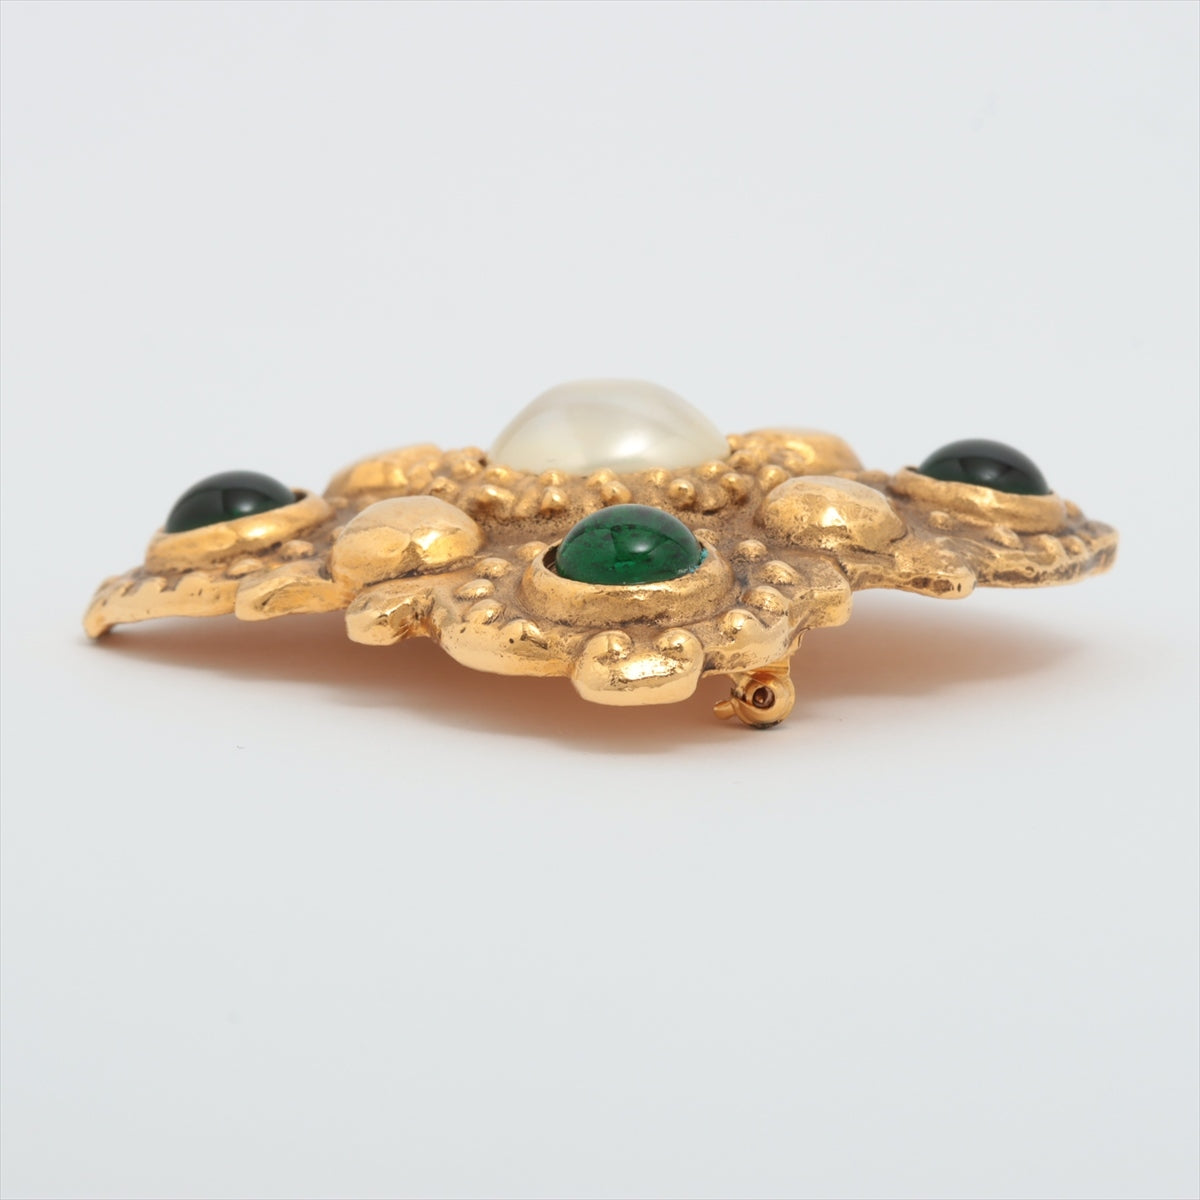 Chanel Brooch GP x fake pearl Gold Scratched Discoloration Stained Plating peeling Losing luster